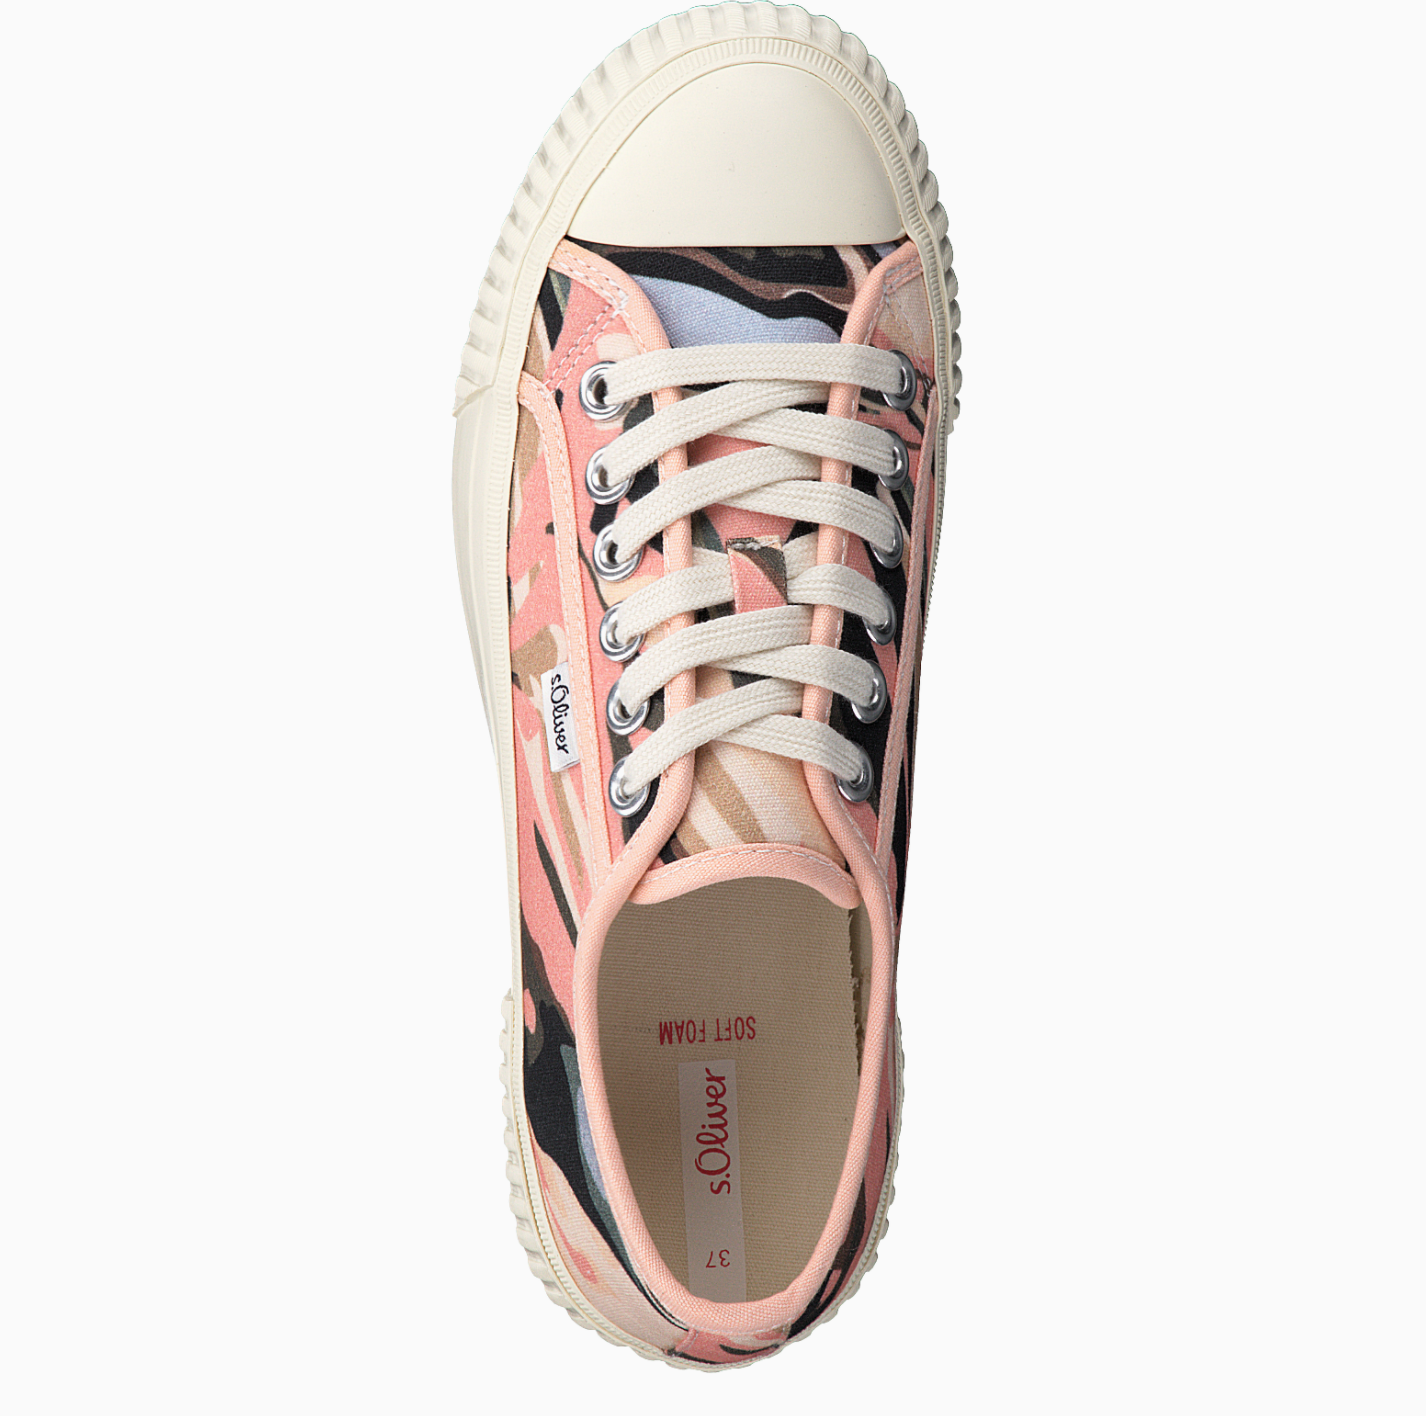 S.Oliver Womens Canvas Fashion Trainer - Pink